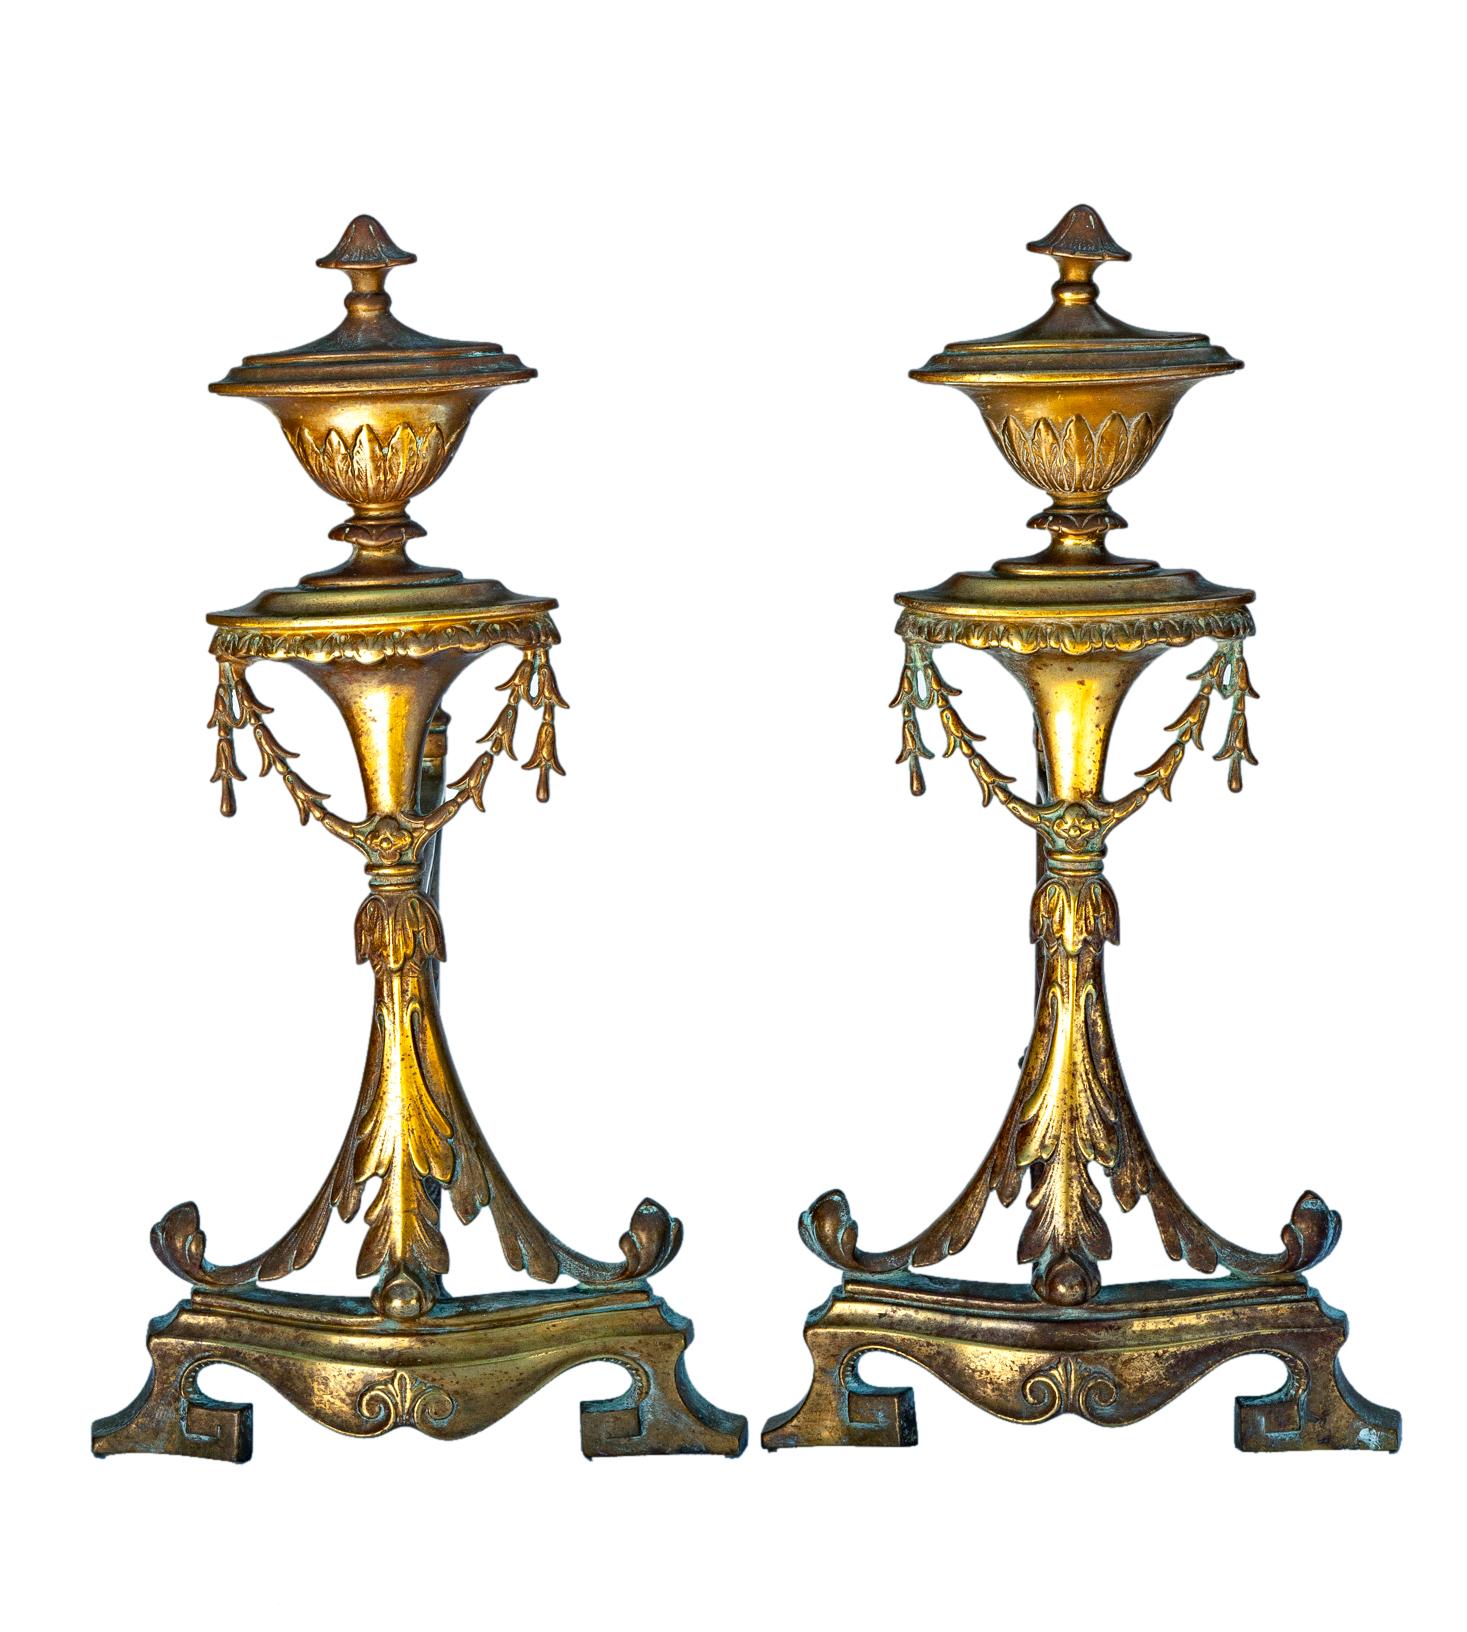 French Provincial Antique French Bronze Decorative Fireplace Andirons For Sale